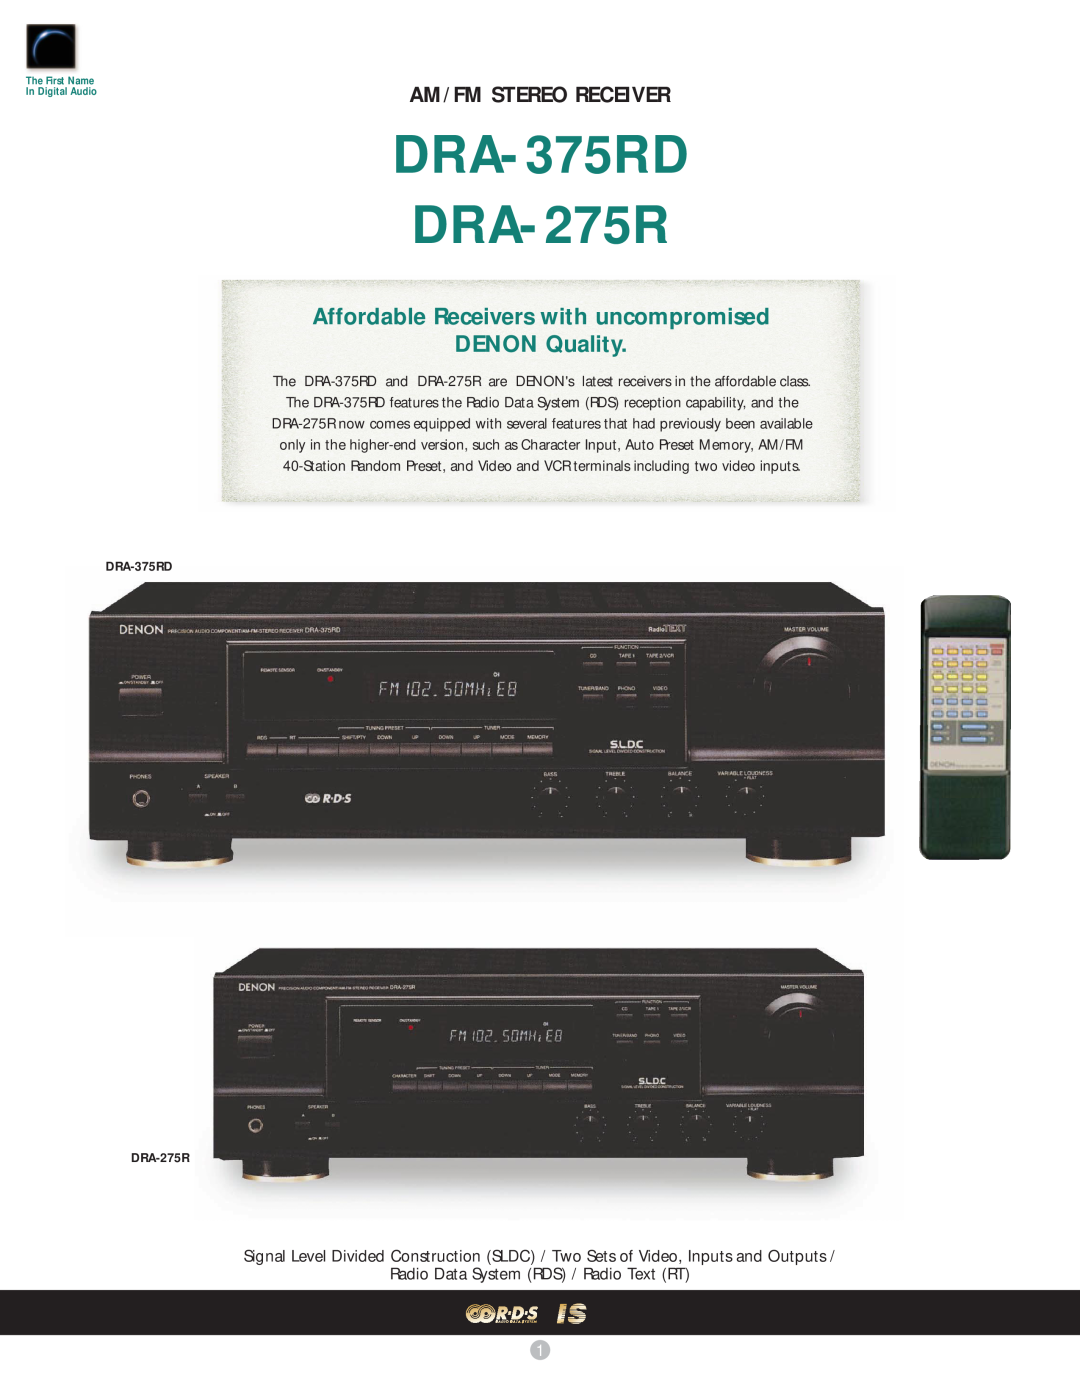 Denon manual DRA-375RD DRA-275R, Affordable Receivers with uncompromised, DENON Quality, Am/Fm Stereo Receiver 